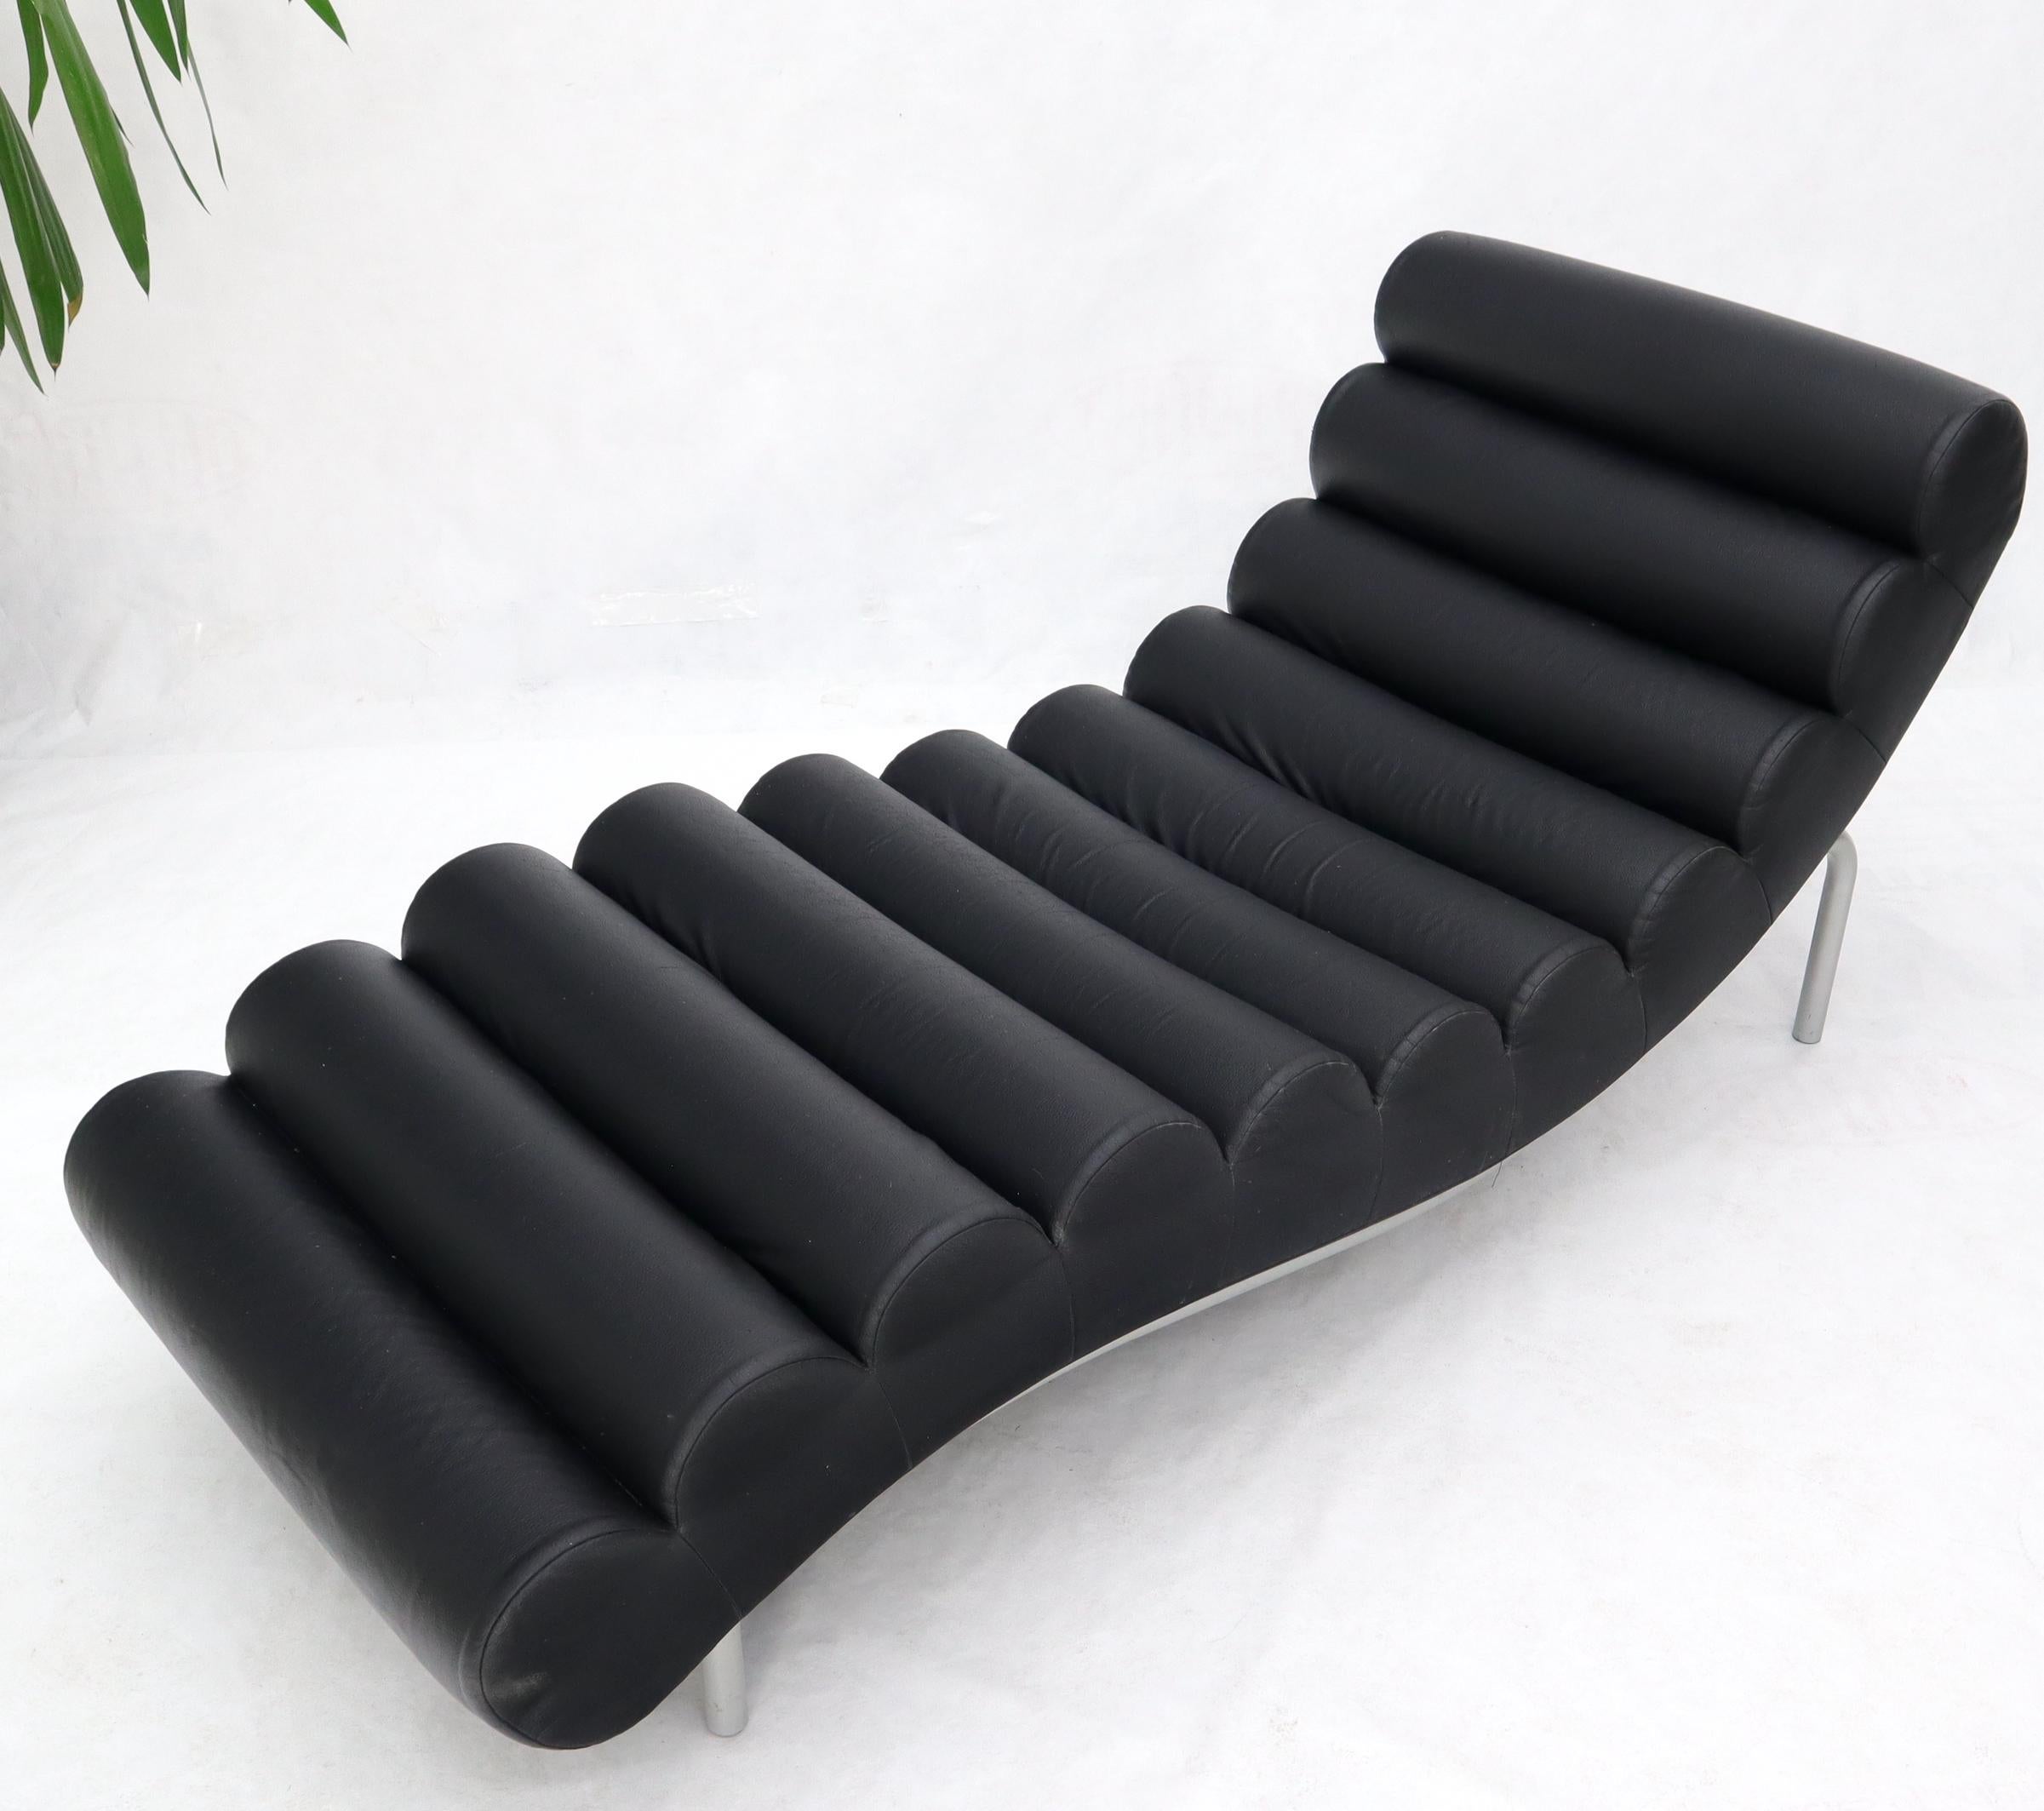 Made in Denmark tubular frame wave shape chaise lounge chair daybed.